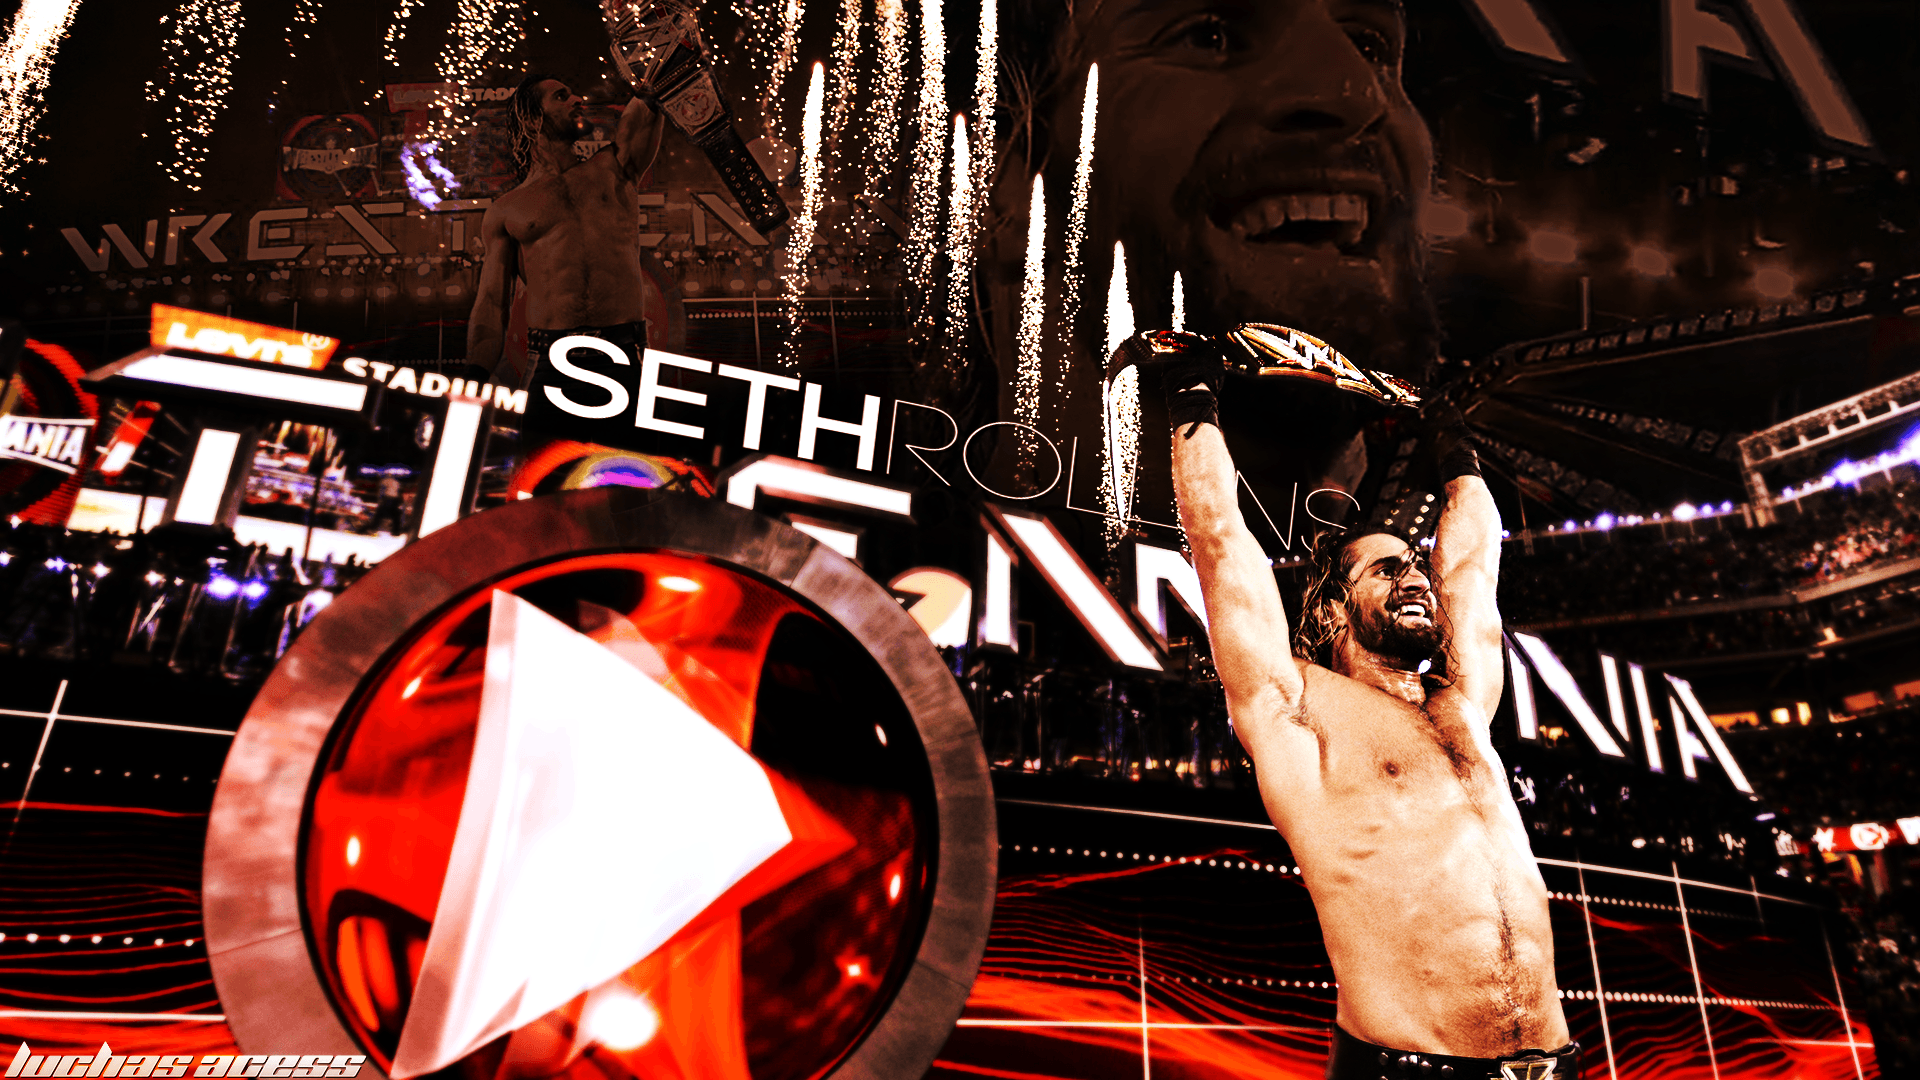 Seth Rollins Wallpaper Download High Quality HD Image